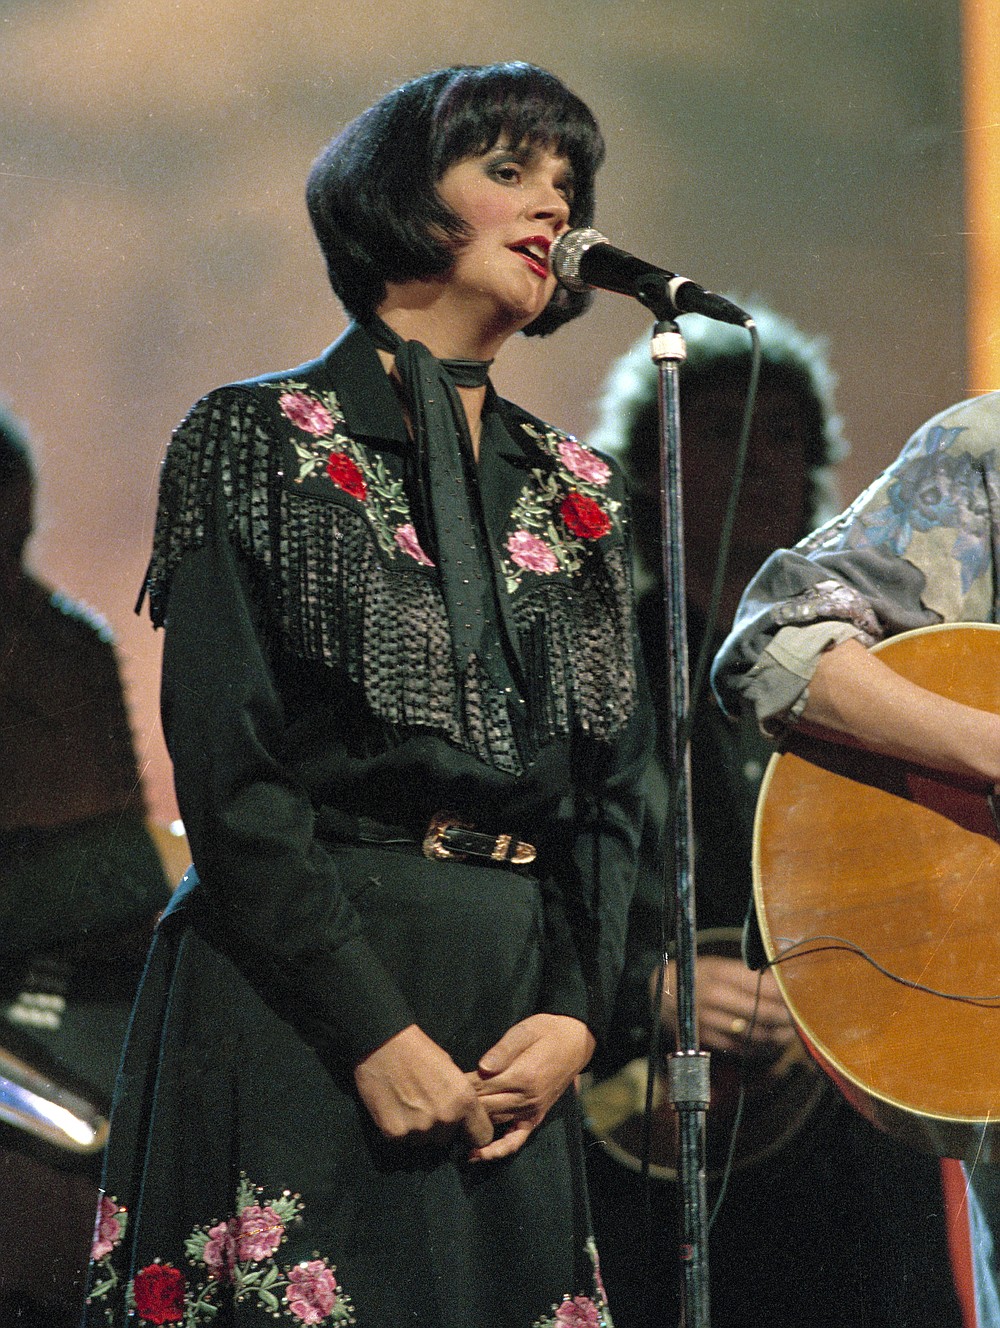 Linda Ronstadt looks back at her most cherished moments of her career